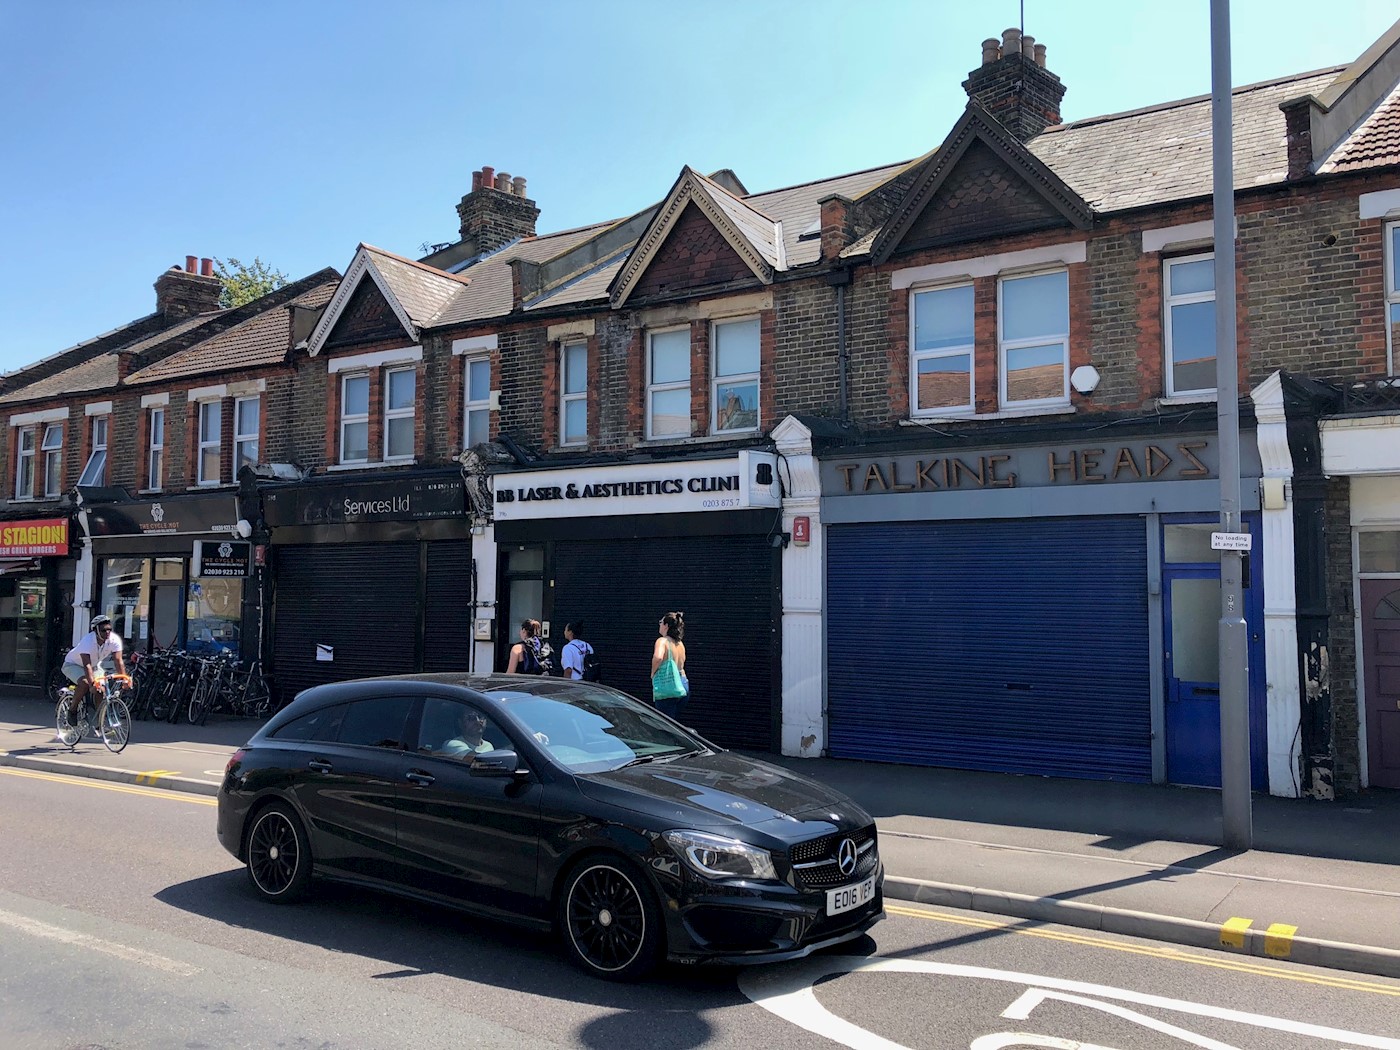 396 Forest Road, Walthamstow, E17 5JF 1/4